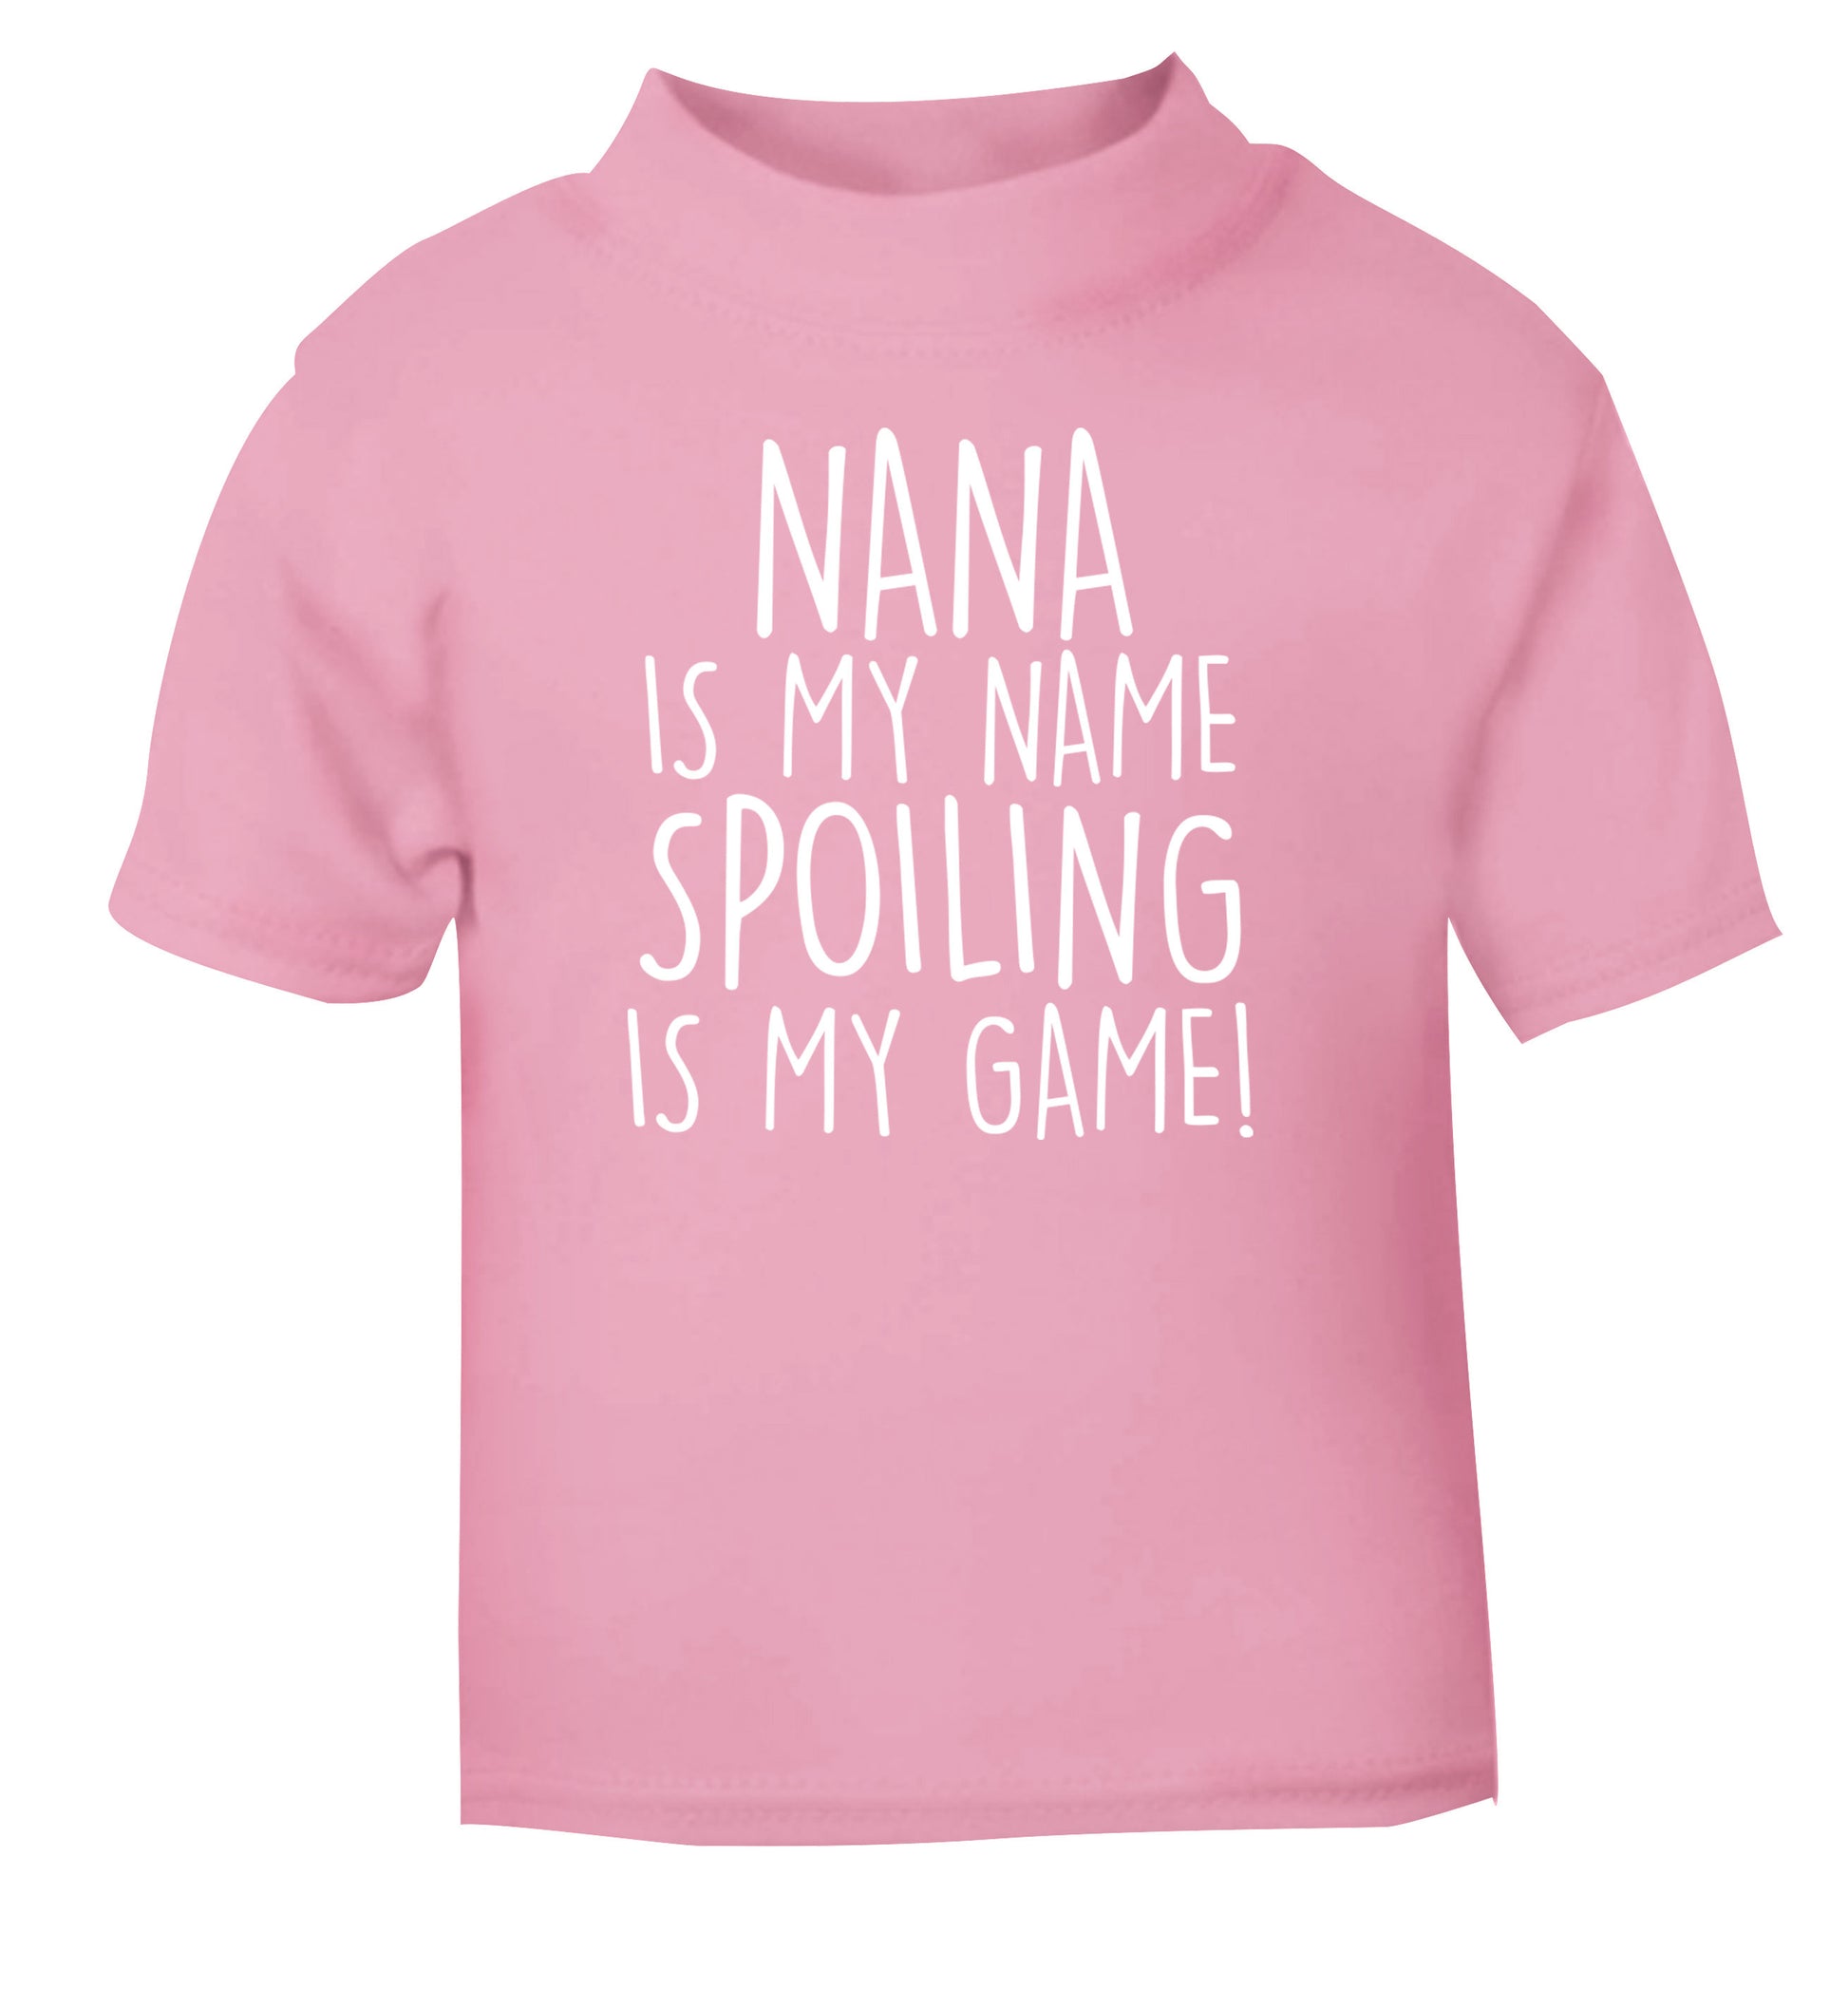 Nana is my name, spoiling is my game light pink Baby Toddler Tshirt 2 Years